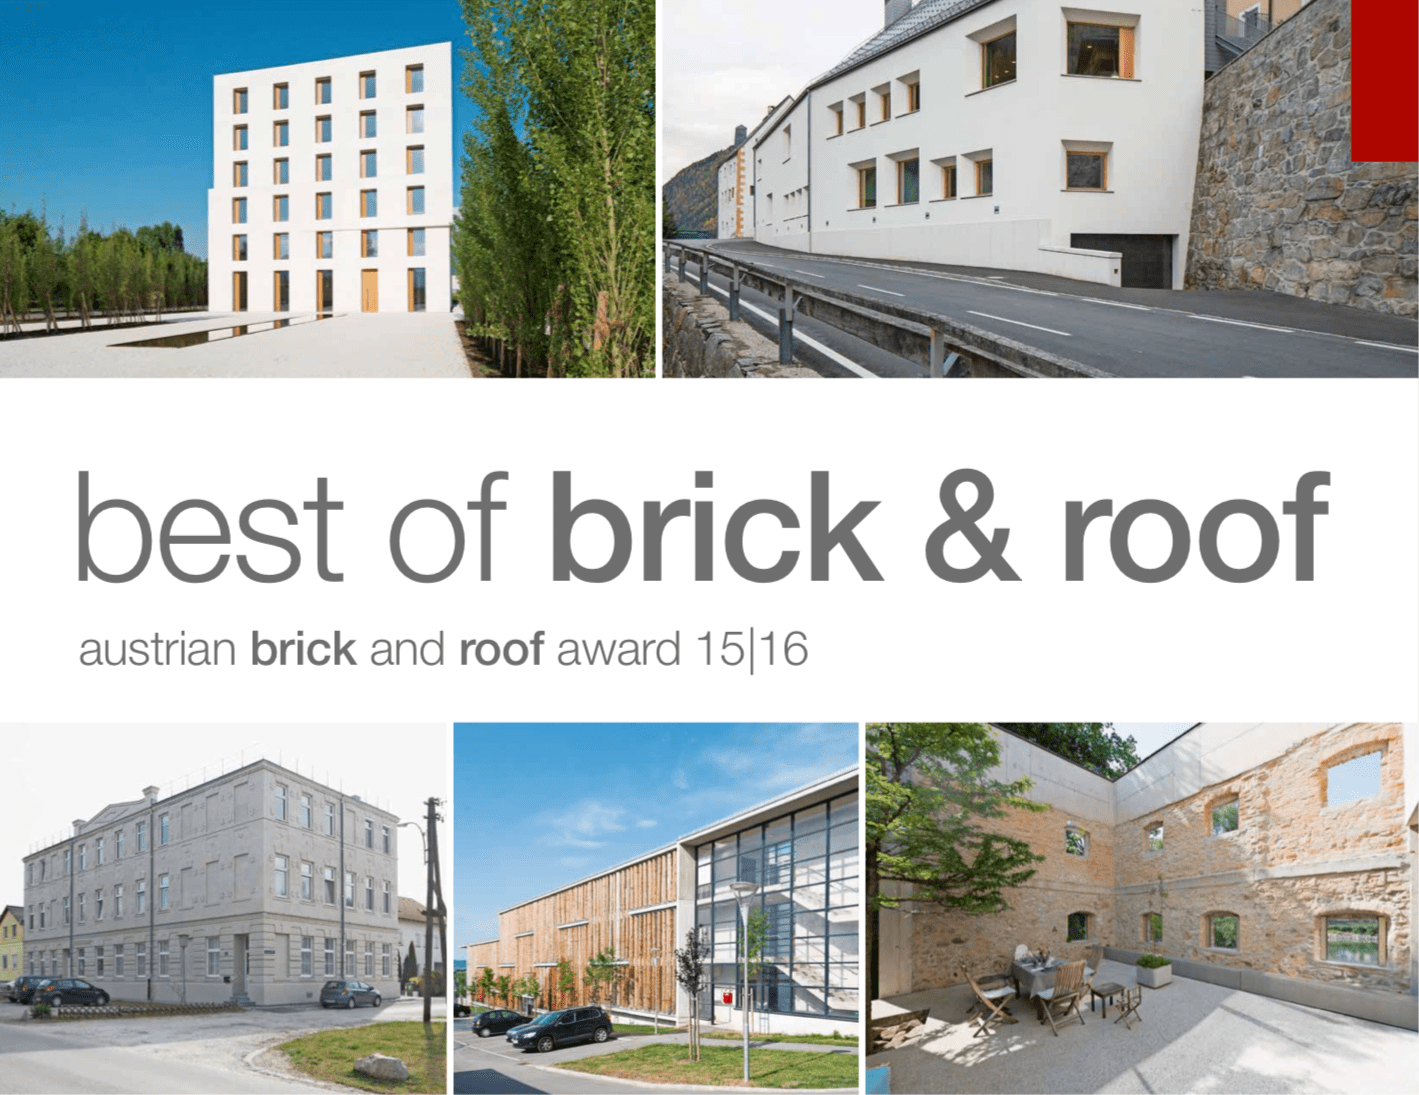 best of brick & roof - austrian brick and roof award 15/16